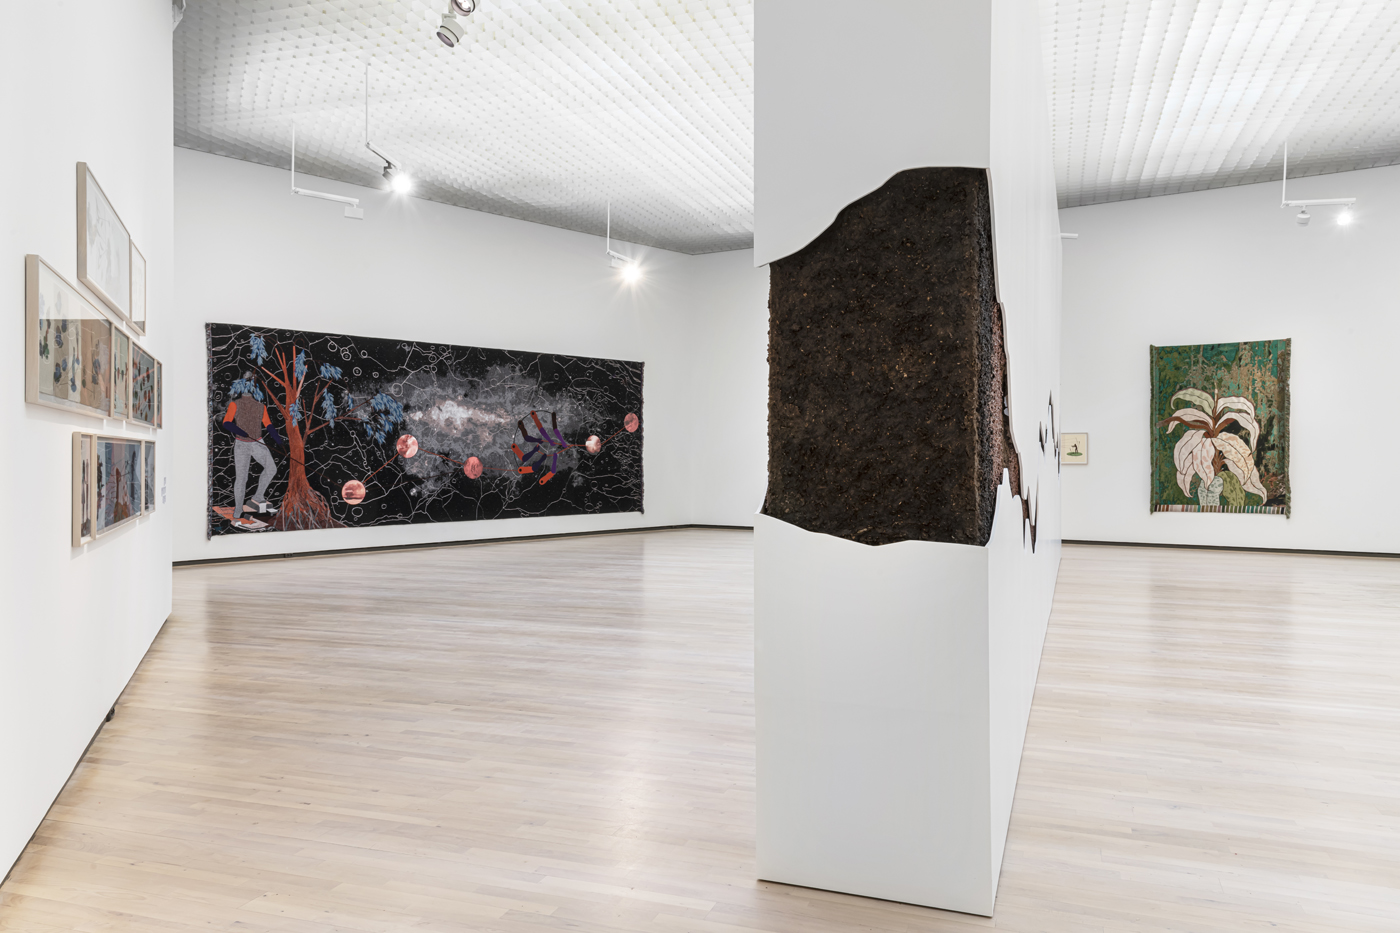 Installation view : Uncertain Where the Next Wind Blows , 13.11-24.05.21